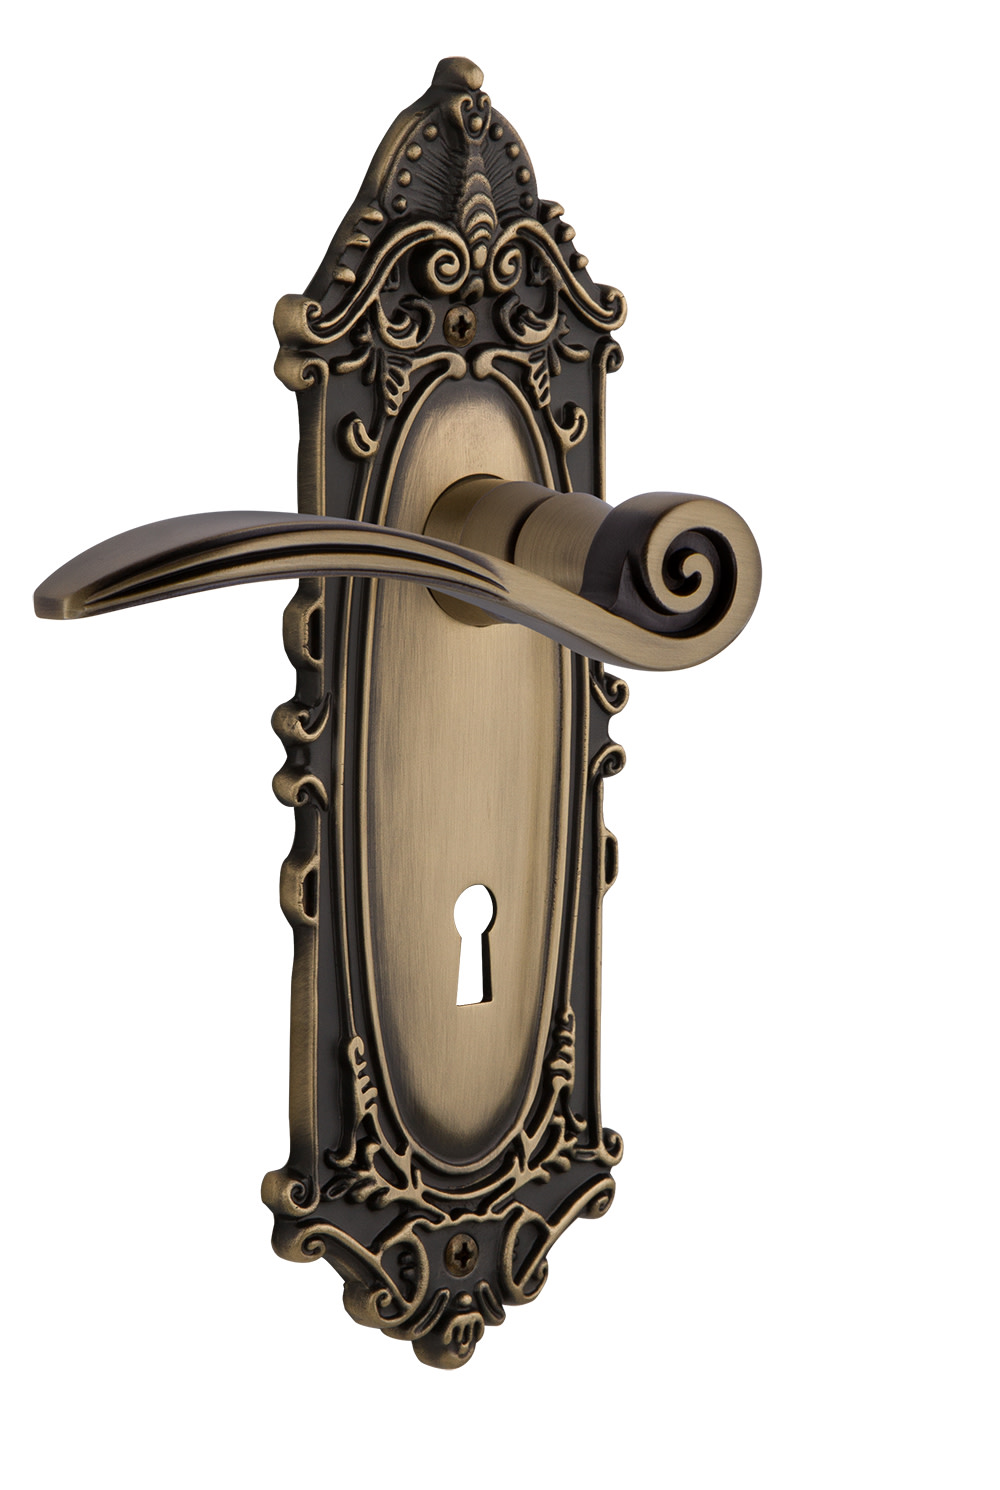 Nostalgic Warehouse Vicswn_Sd_Kh_Rh Swan Non-Turning One-Sided Door Lever - Brass - image 1 of 1